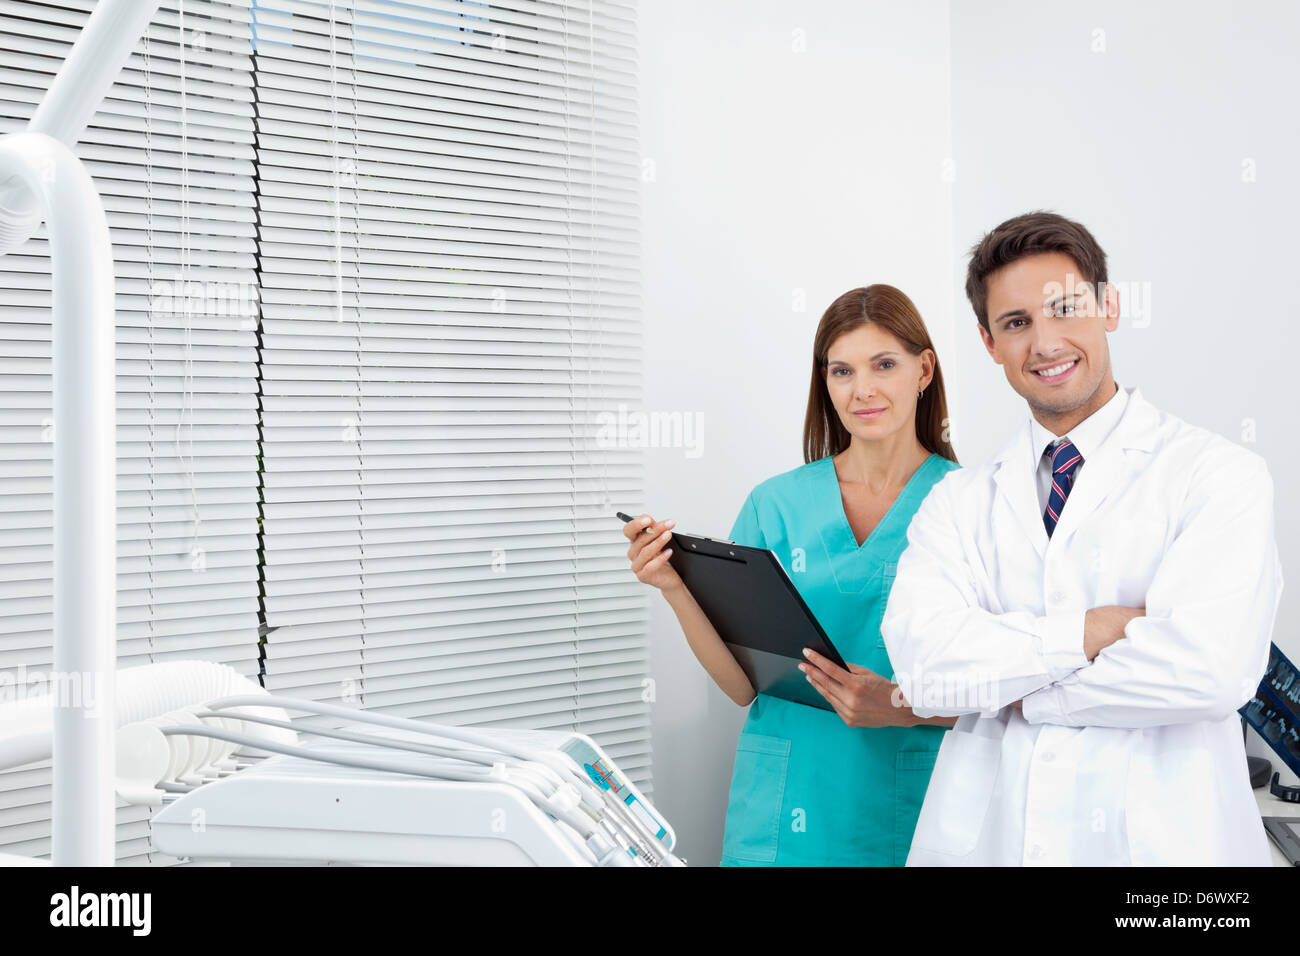 Doctor And Female Assistant In Dental Clinic Stock Photo